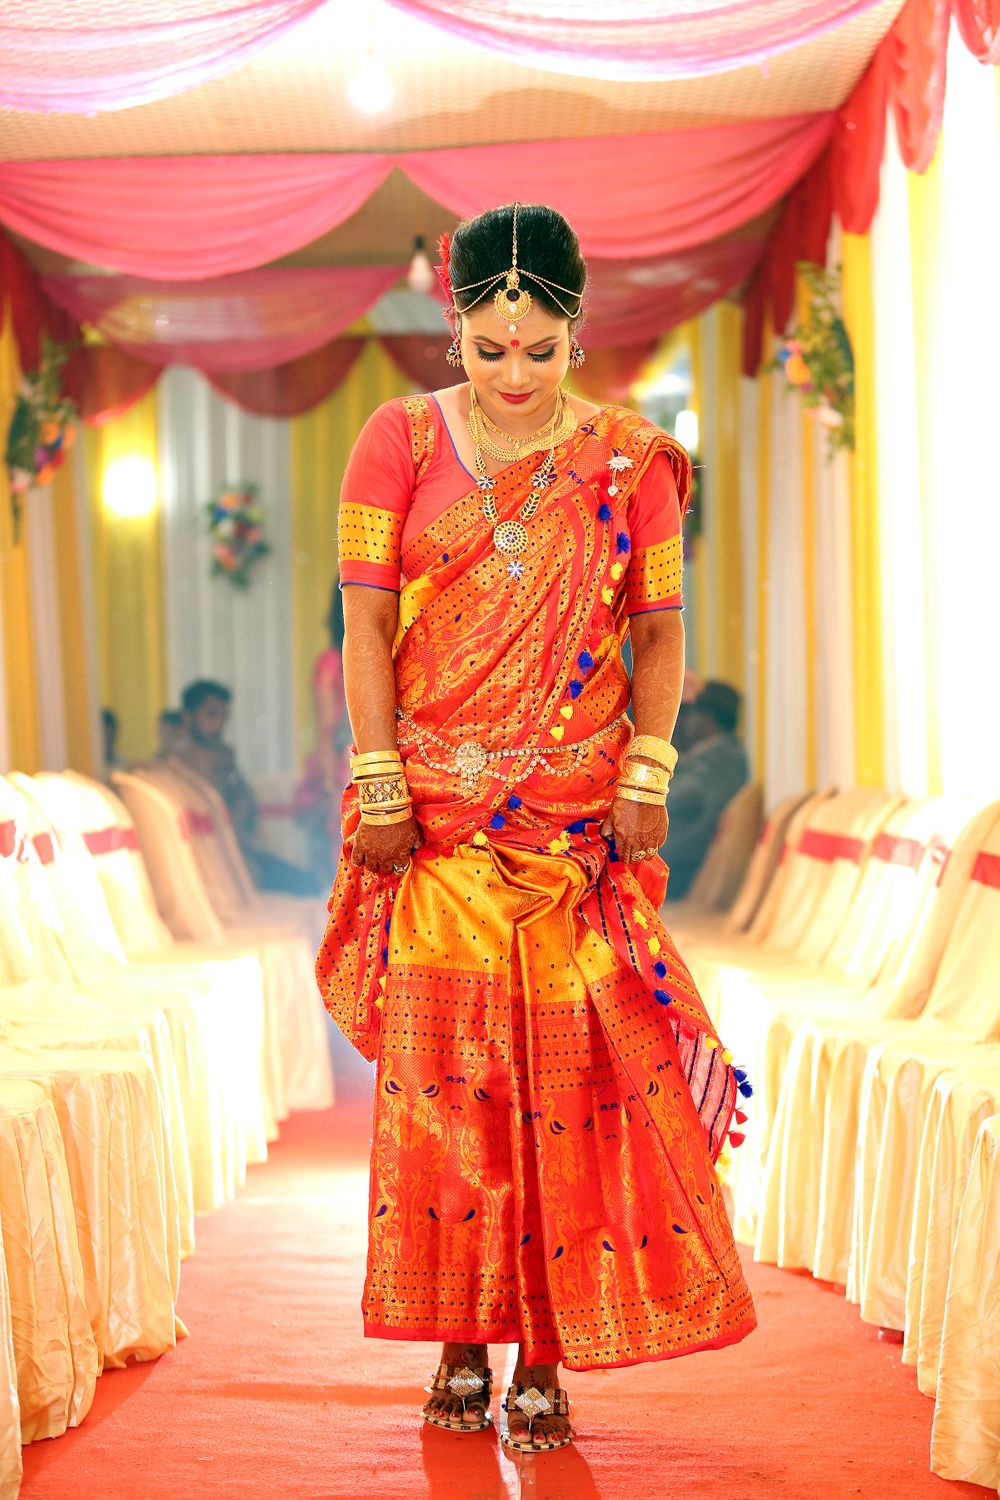 Photo From The bride of wedding - By Tilak Medhi Photography